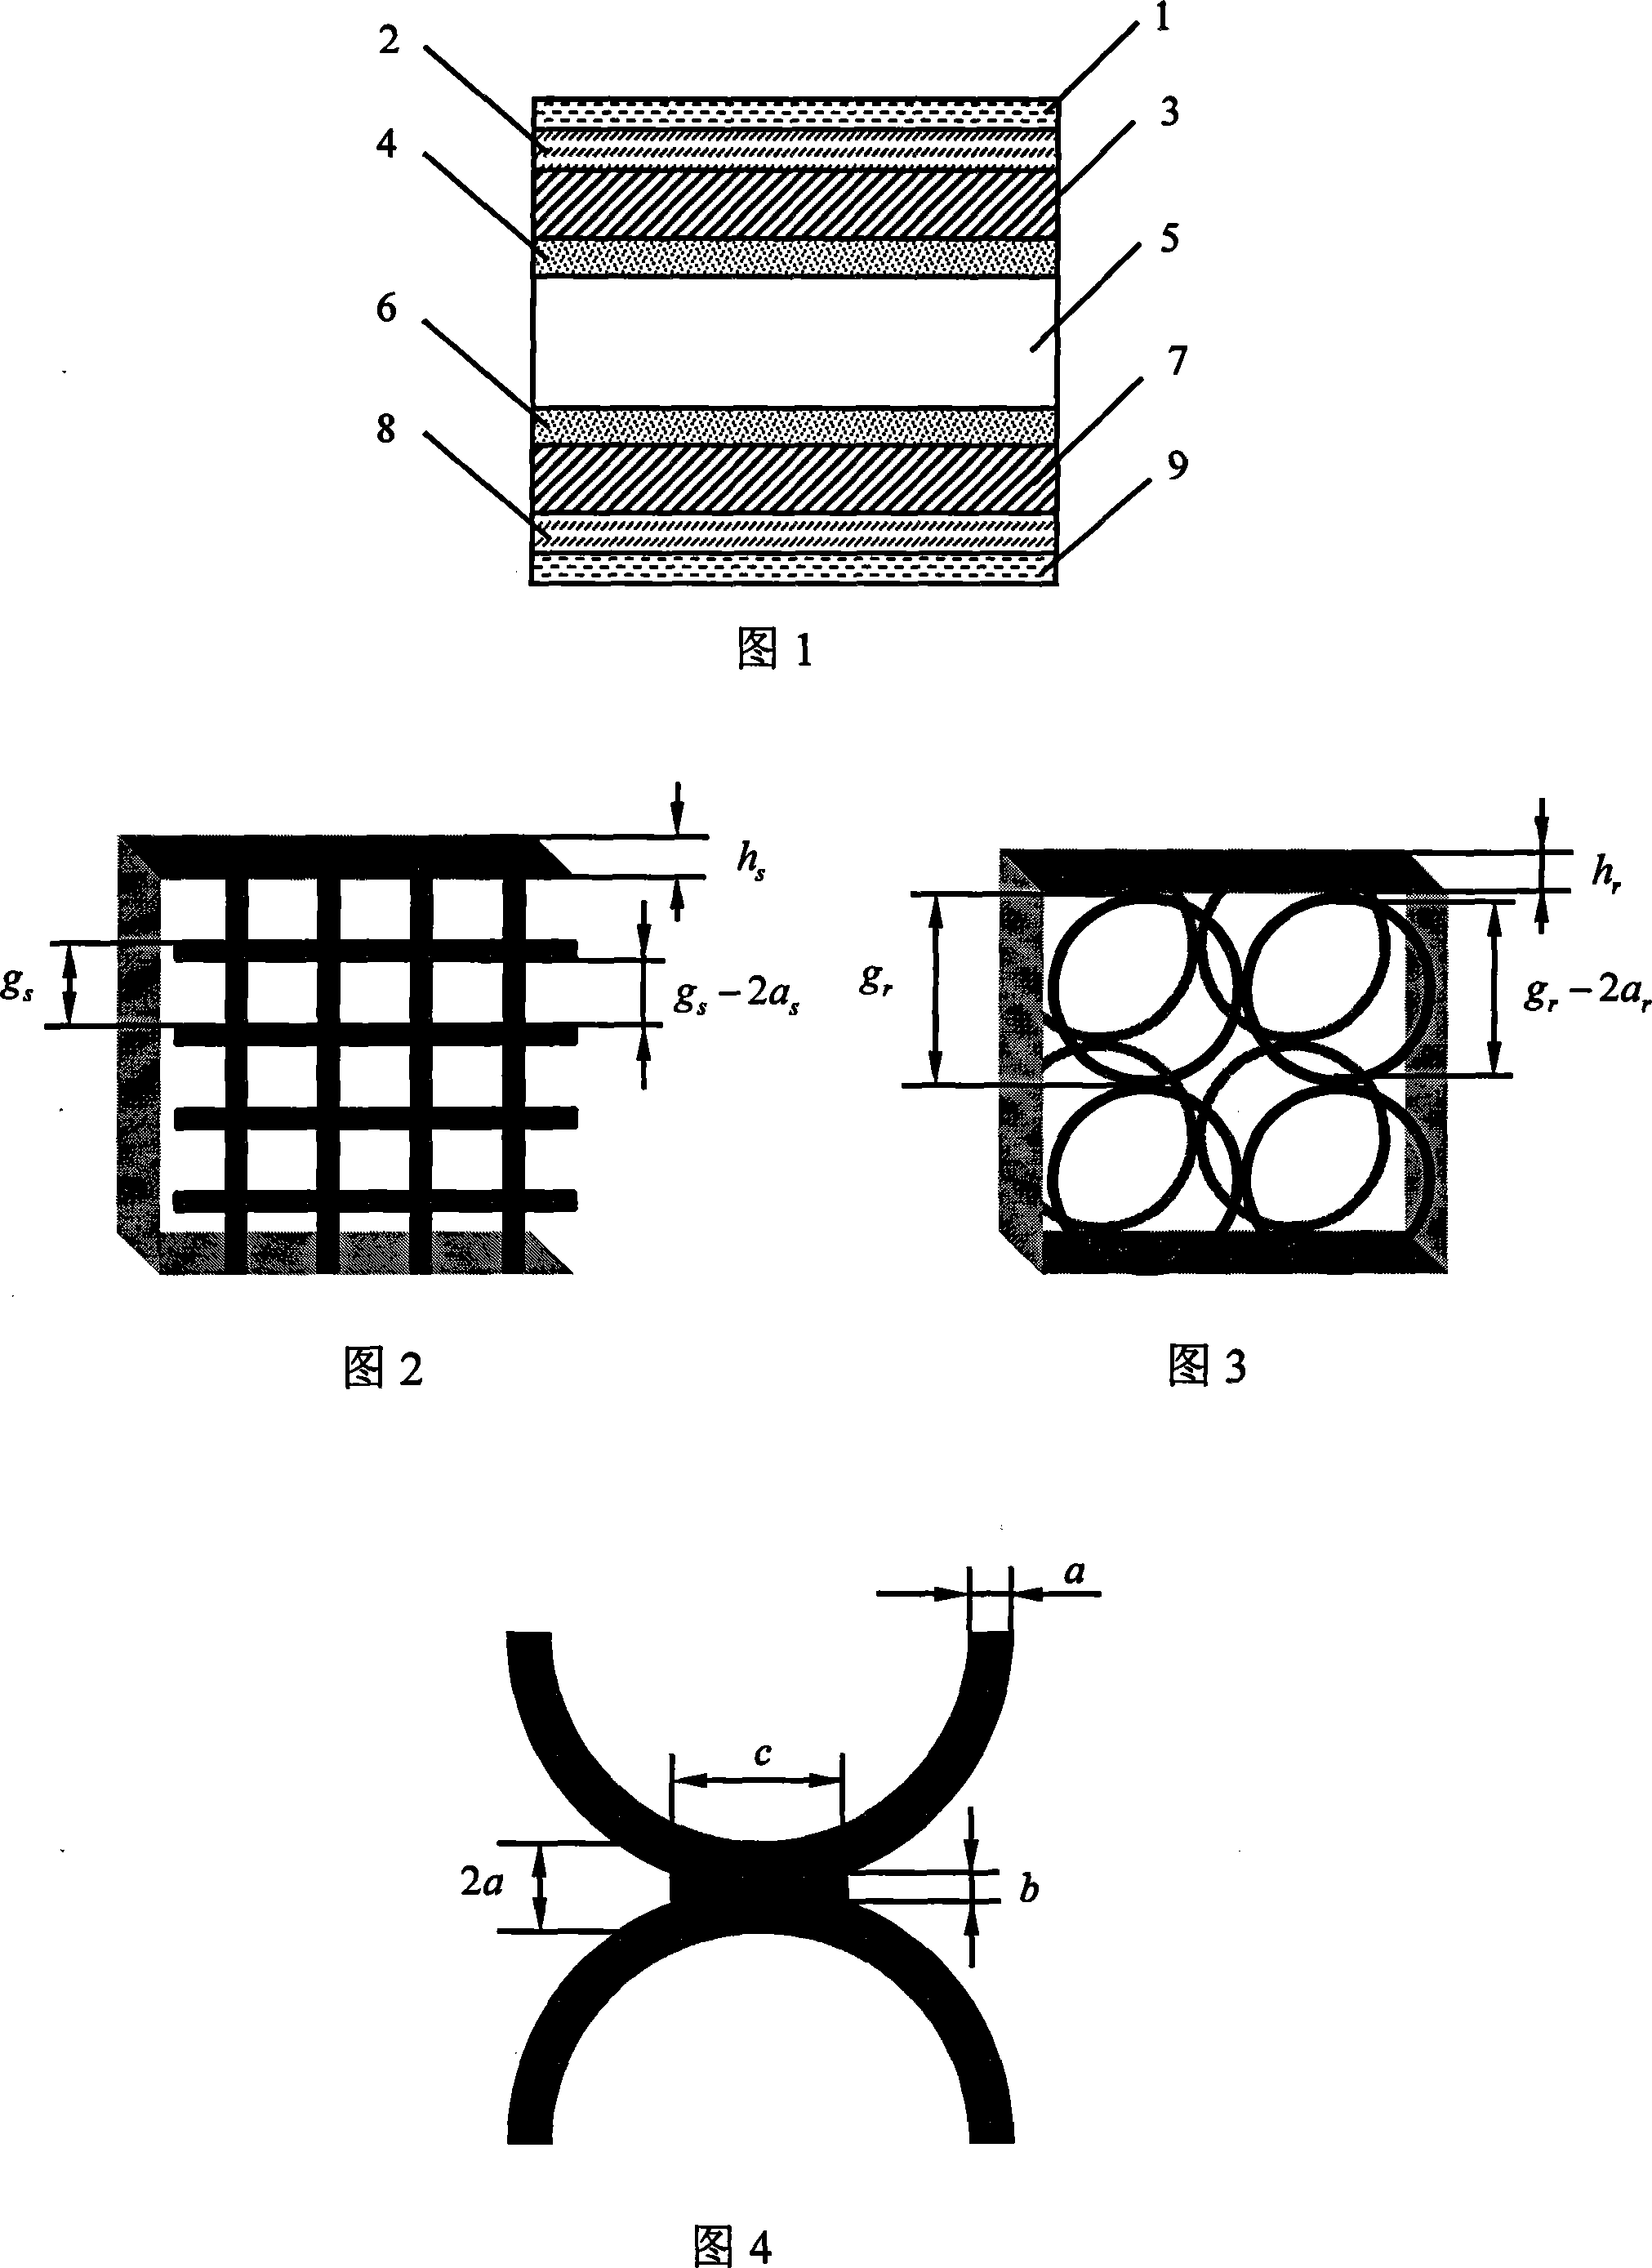 Electromagnetic shielding optical window with double-layer circular ring metal gridding structure